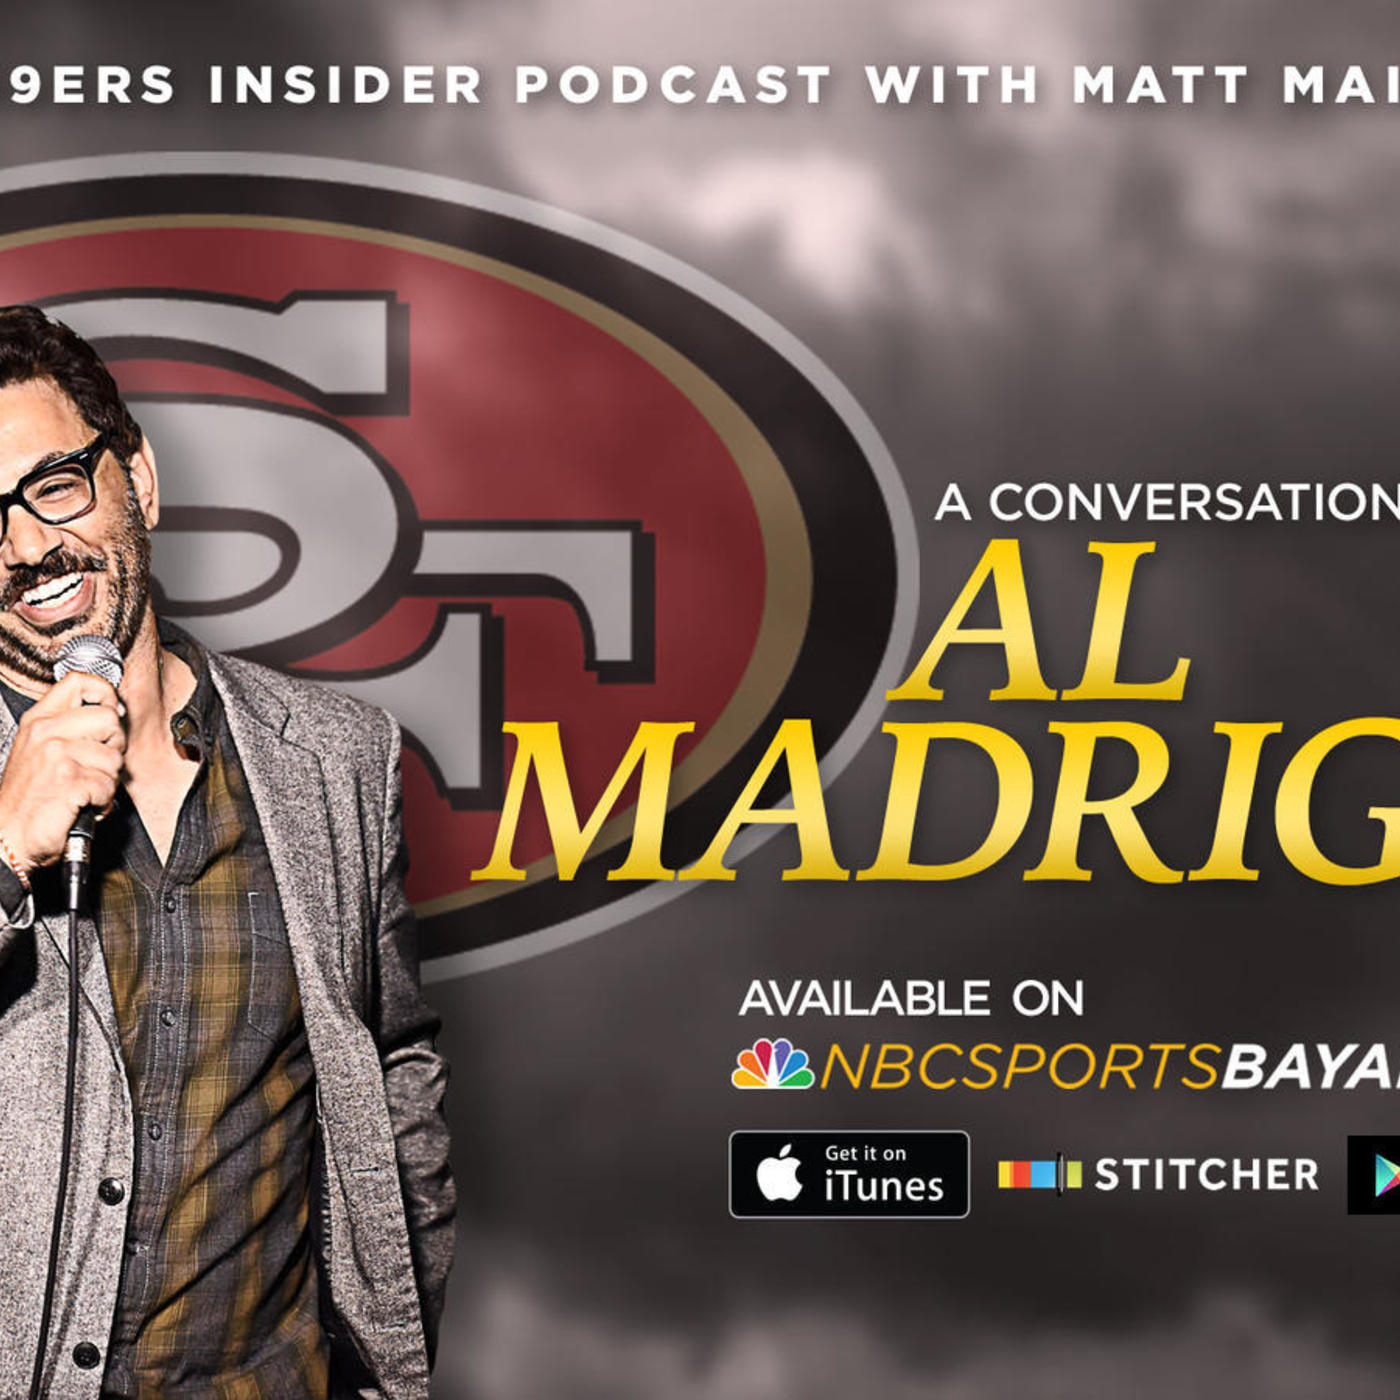 42. 49ers: Comedian Al Madrigal shares his lifelong passion of his hometown NFL team